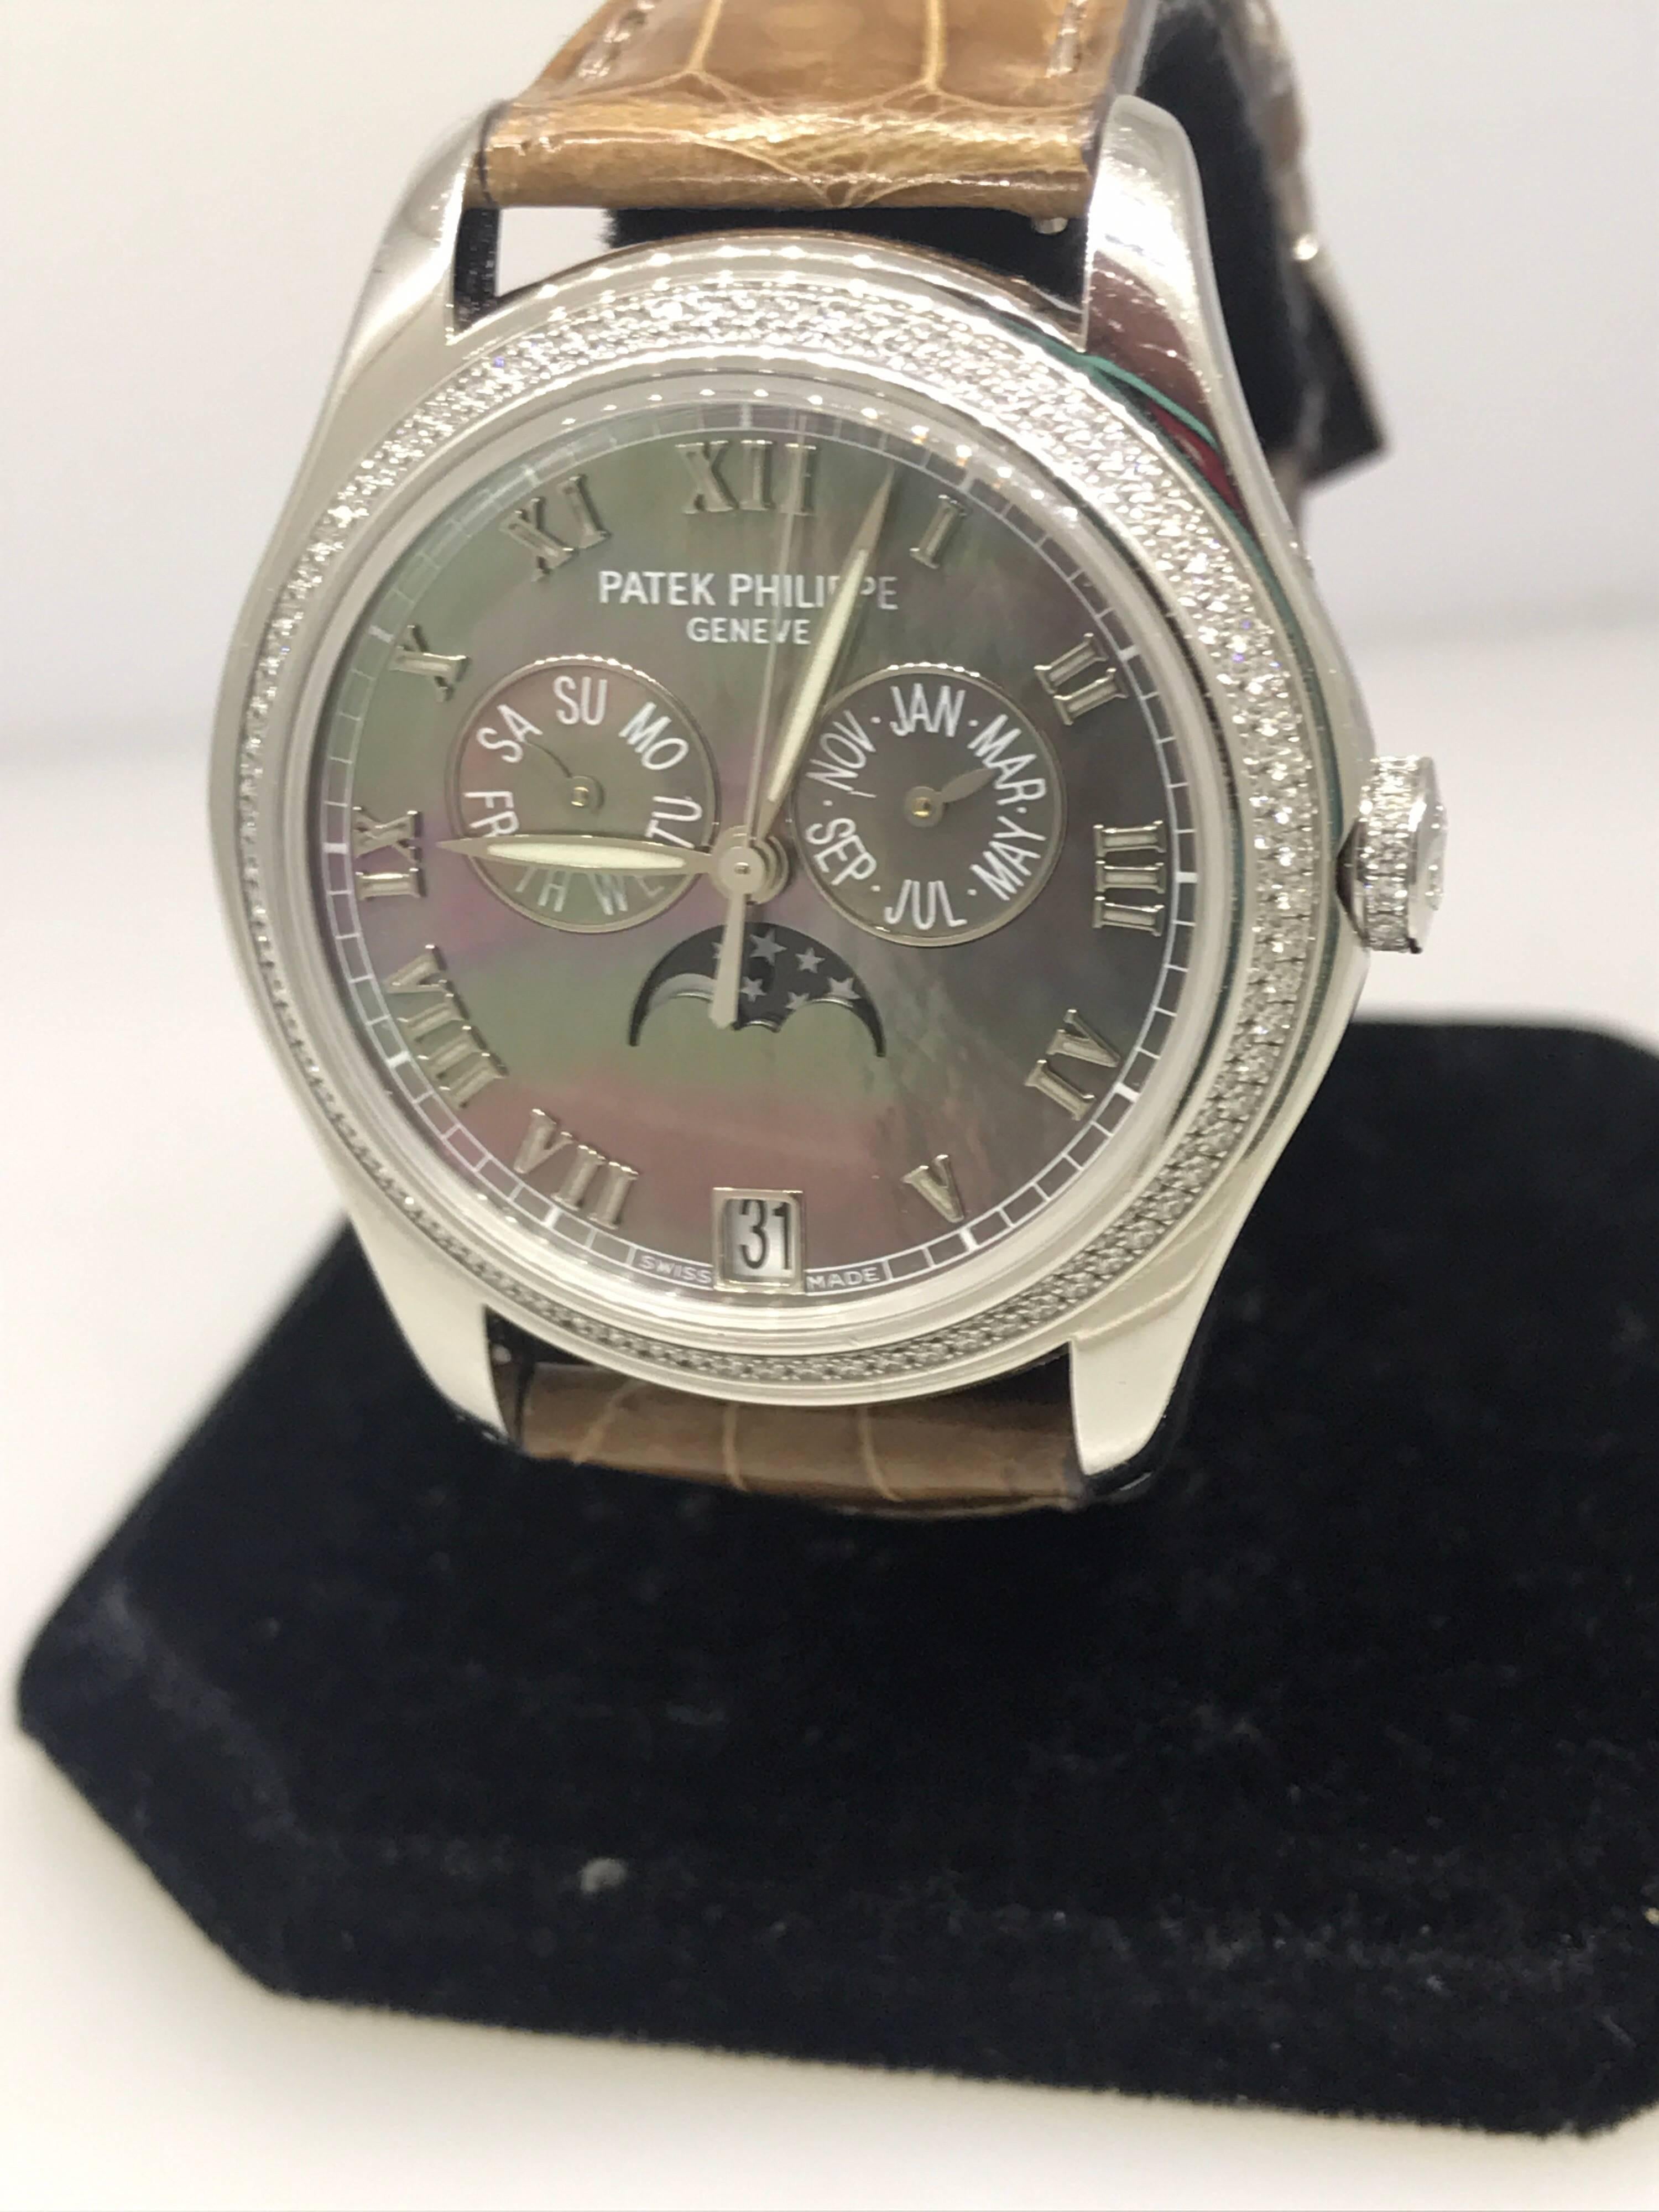 Patek Philippe Complications Annual Calendar Ladies Watch

Model Number: 4936G-001

100% Authentic

Pre-owned in excellent condition

Comes with original Patek Philippe Box, Warranty, and instruction manual

18 Karat White Gold Case & Buckle

Black